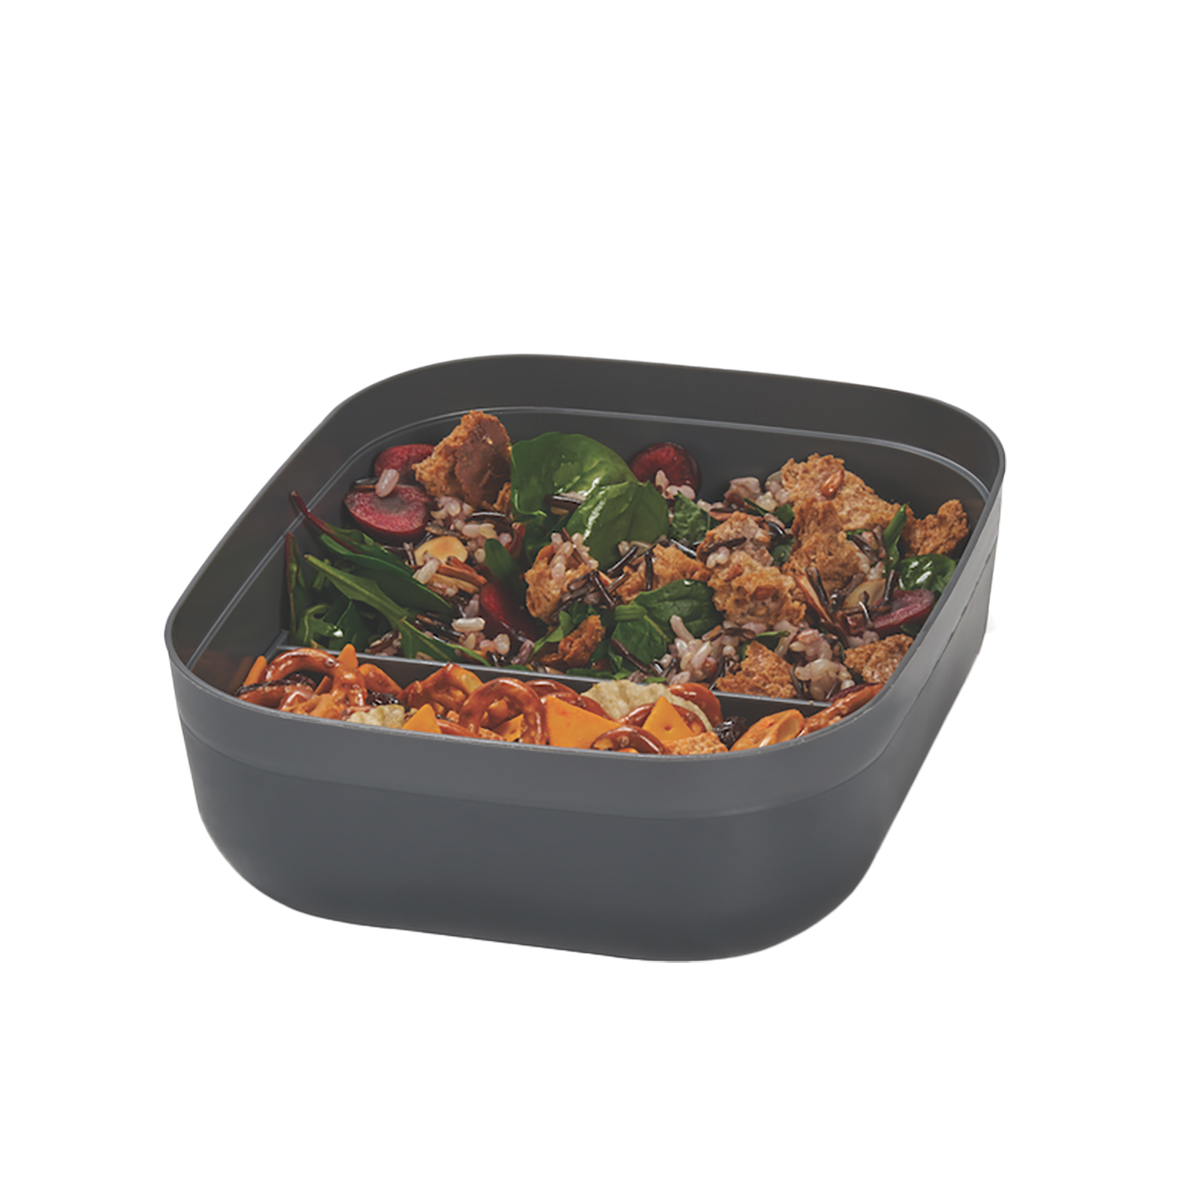 https://www.containerstore.com/catalogimages/460553/10088728-Porter_Lunchbox_Charcoal-ve.jpg